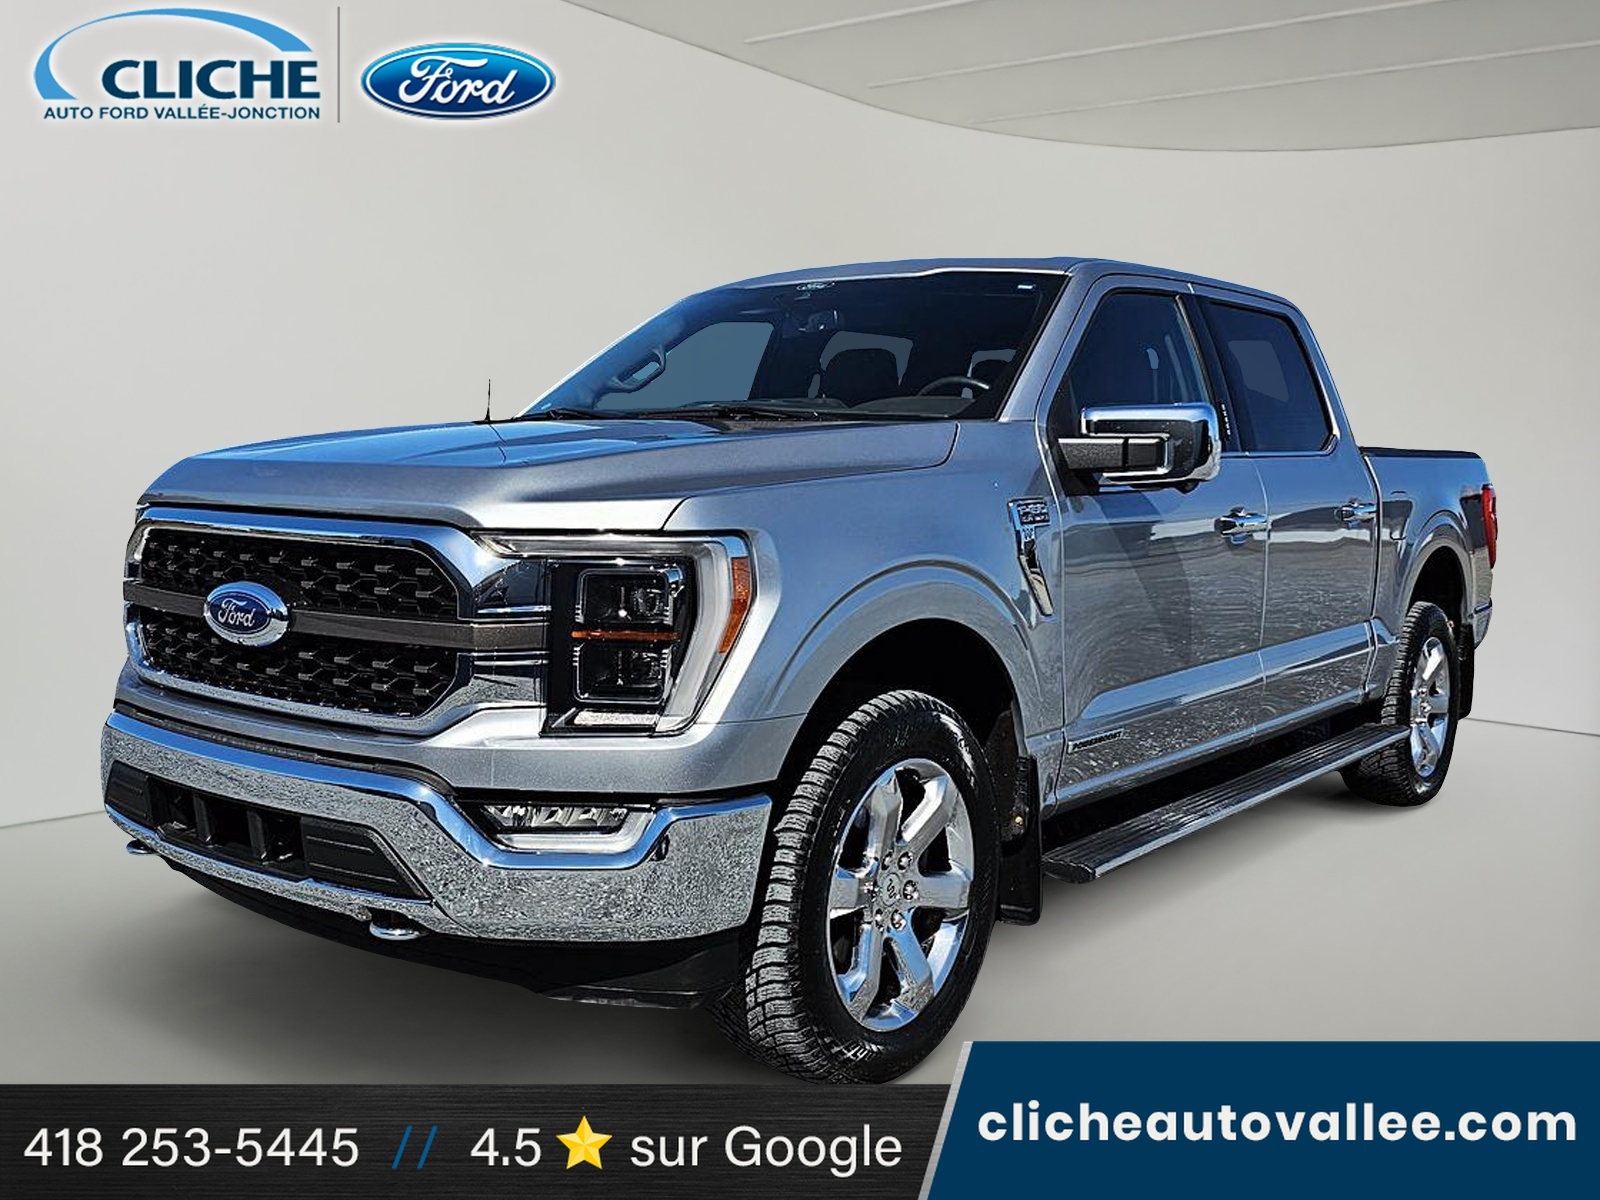 2021 Ford F-150 KING RANCH, POWERBOOST (HYBRIDE), TOIT PANO